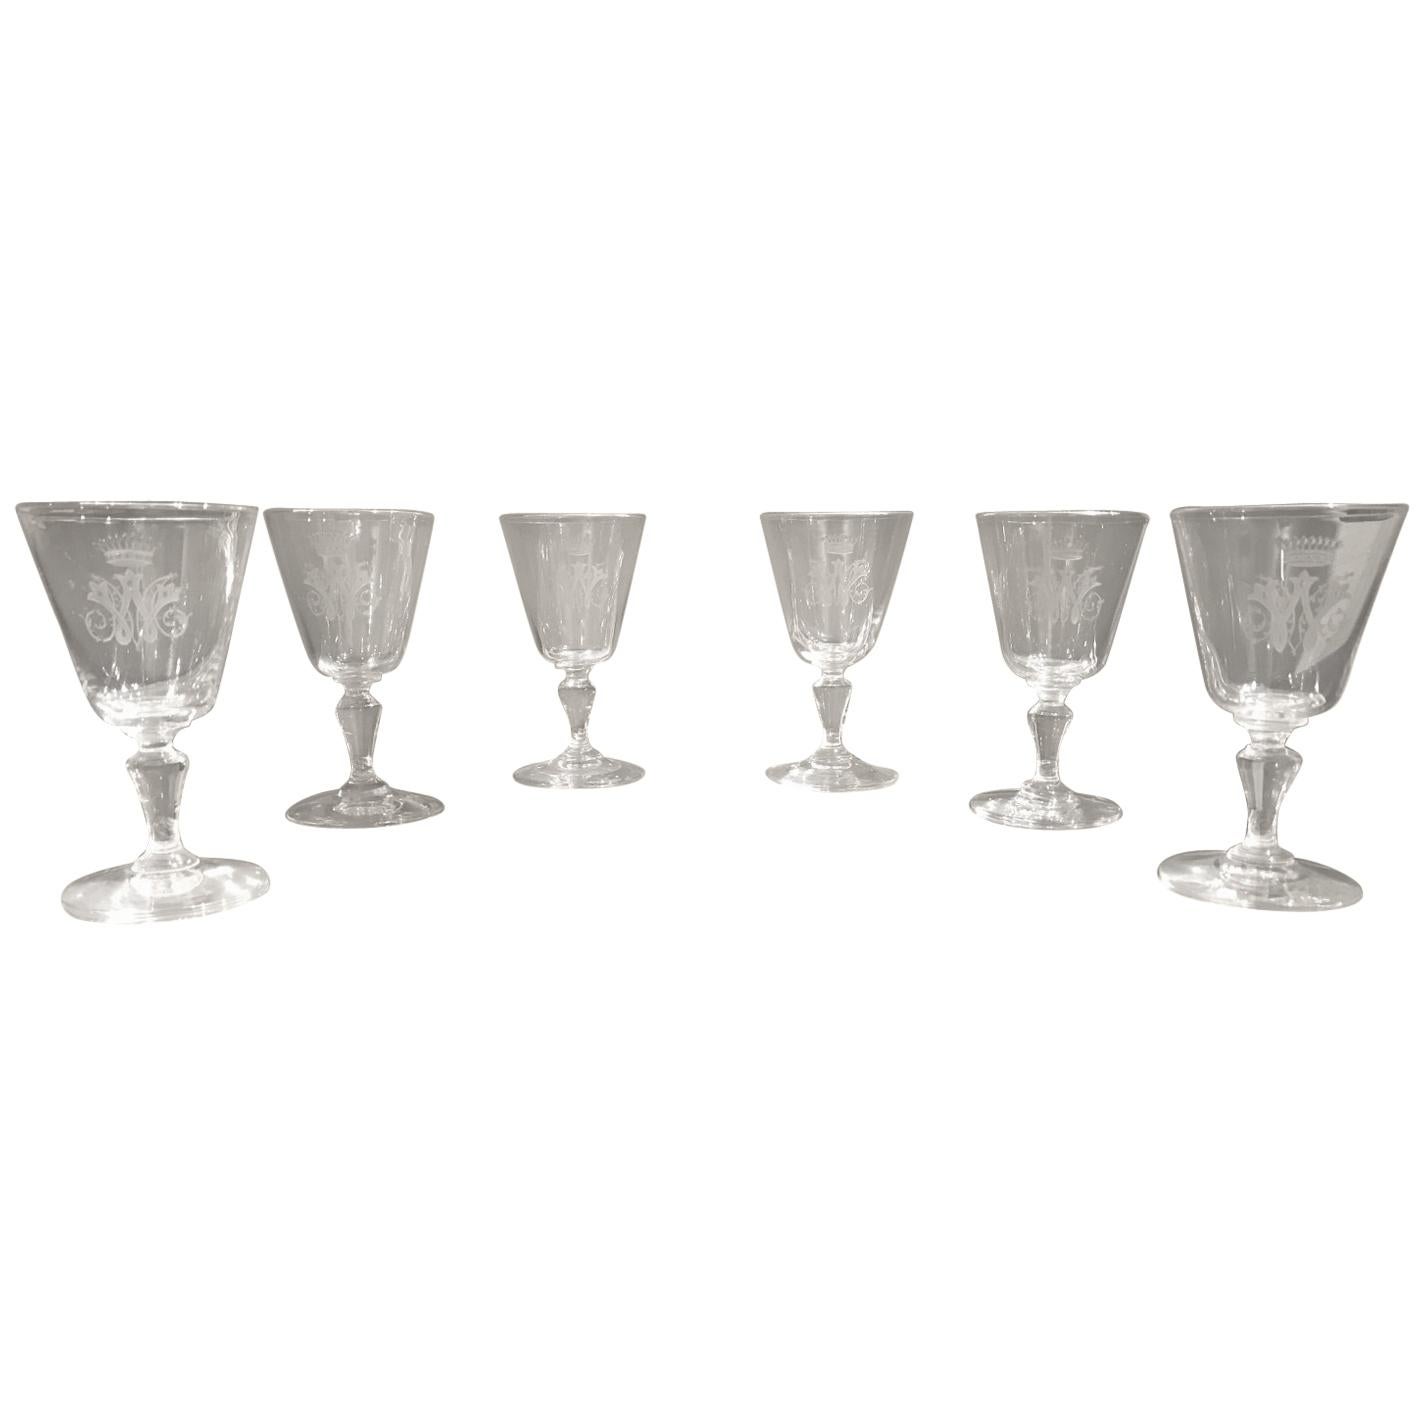 French 19th Century Crystal Liquor or Liqueur Glasses For Sale